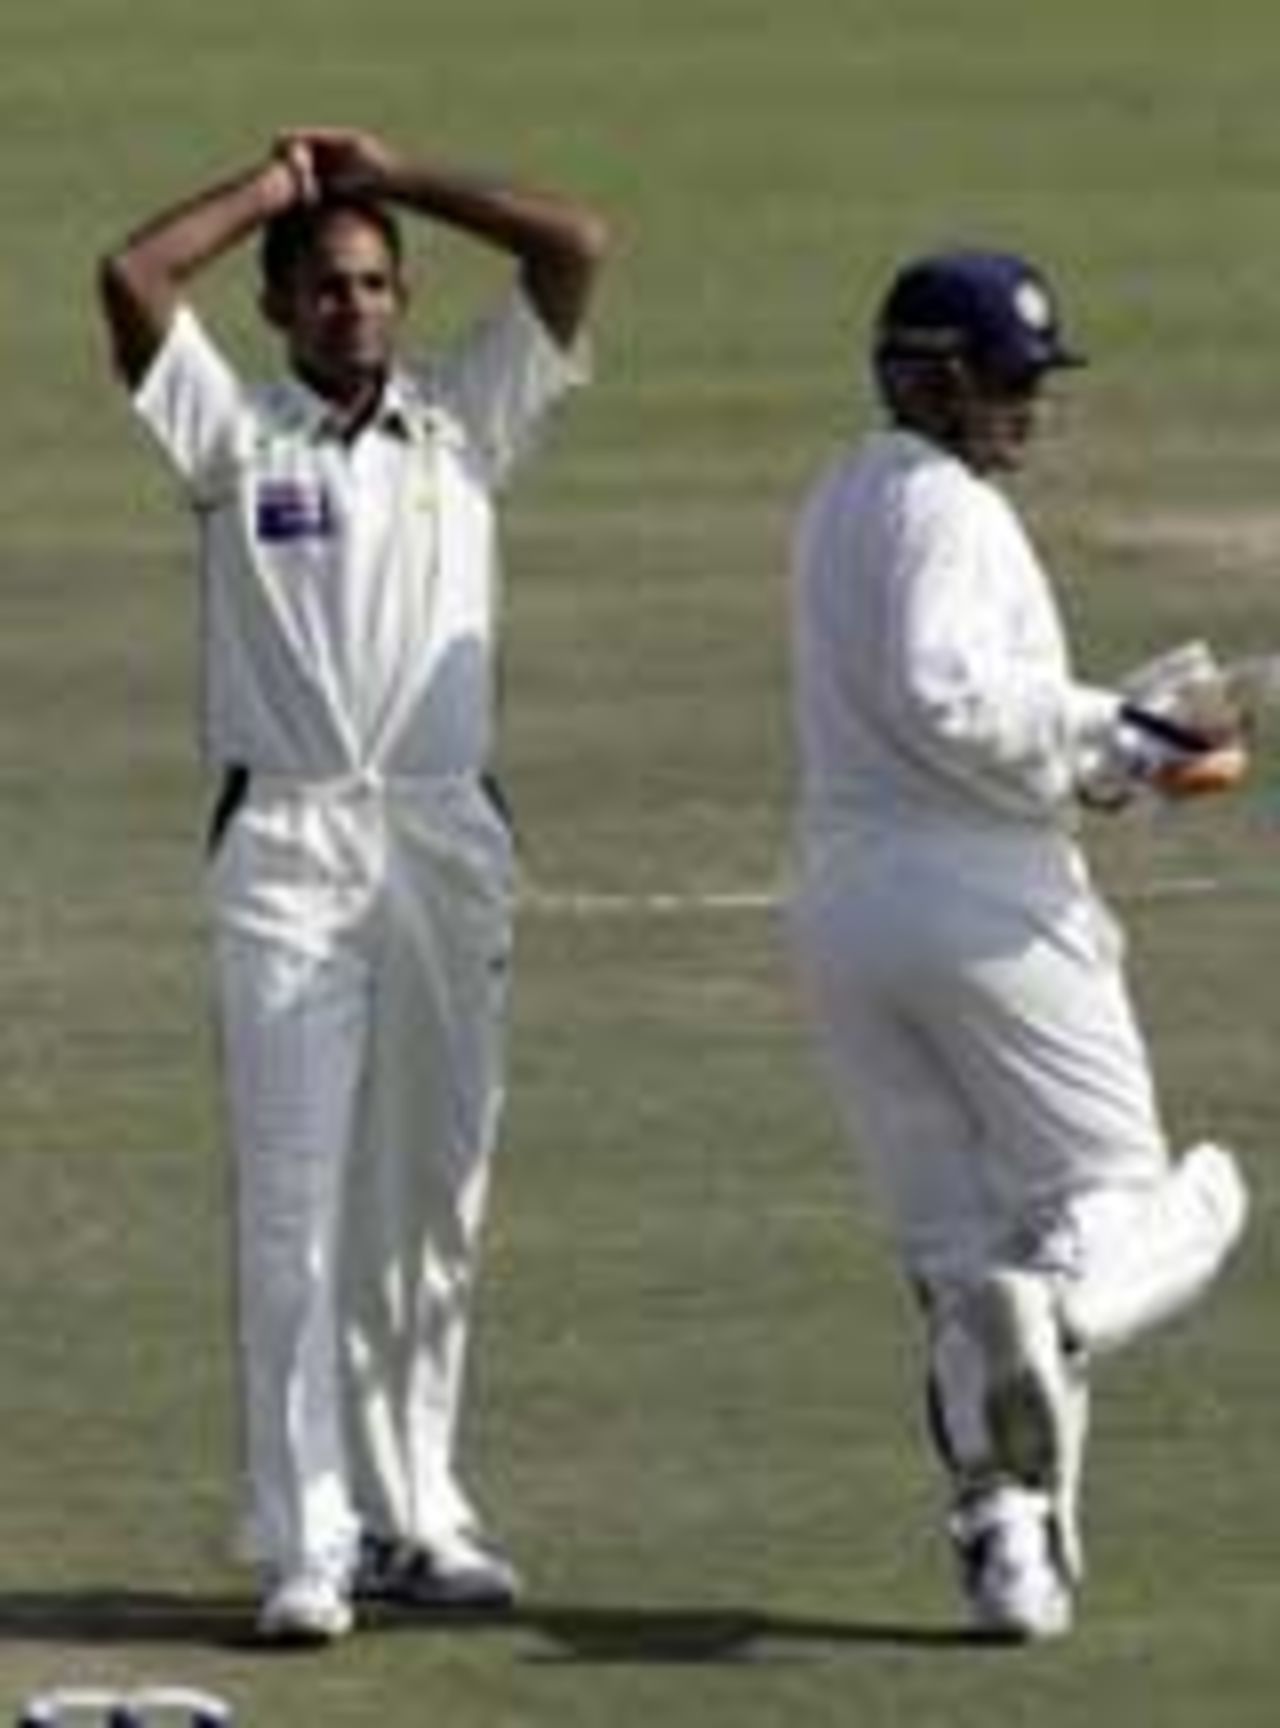 Naved-ul-Hasan despairs as Virender Sehwag slaps the ball to the fence, India v Pakistan, 1st Test, Mohali, March 10, 2005